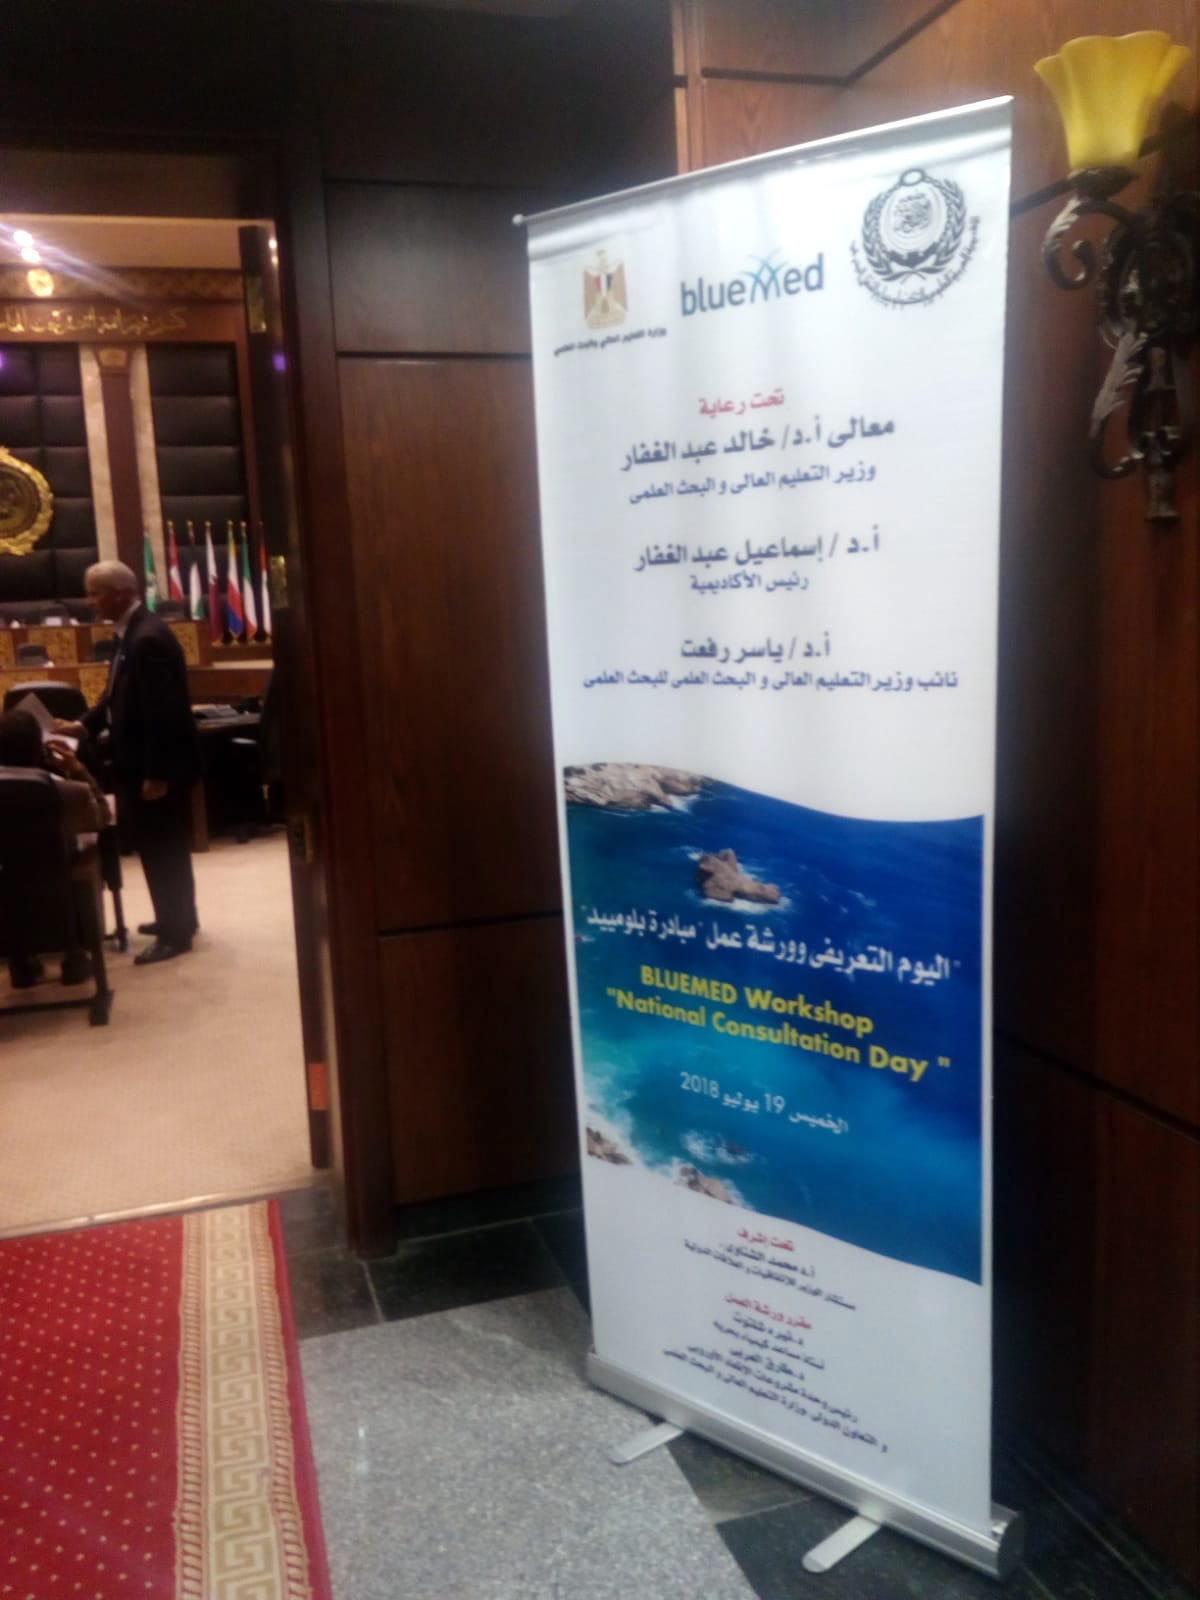 BlueMed Egyptian National Day on July 16th, 2018 in Alexandria, Egypt